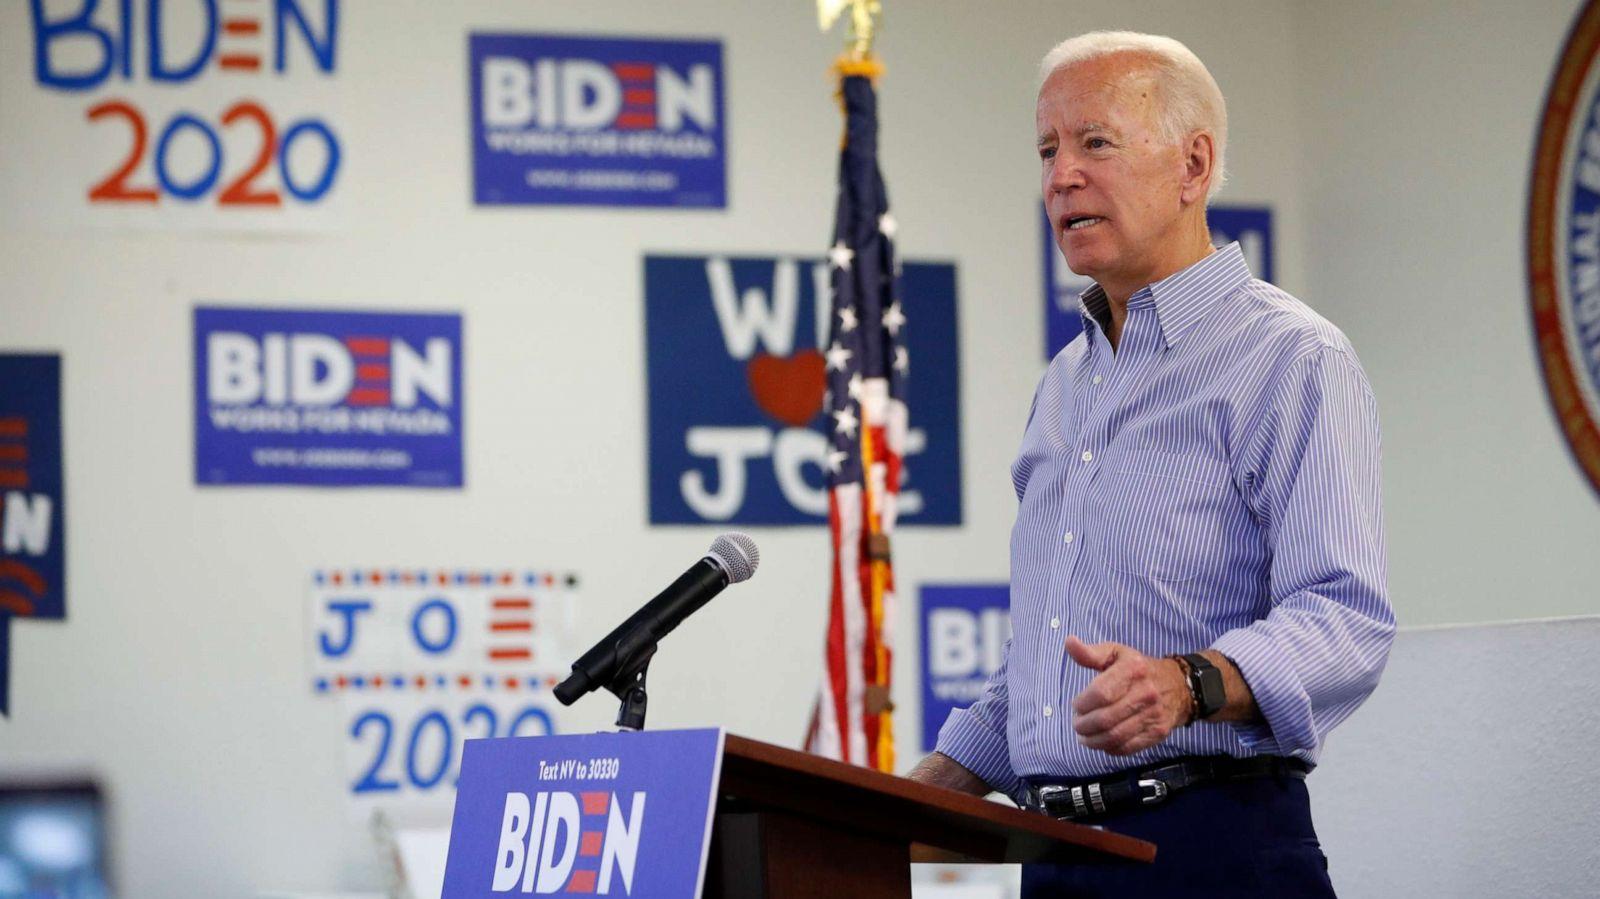 Biden defends about face on crime law he helped create ABC News